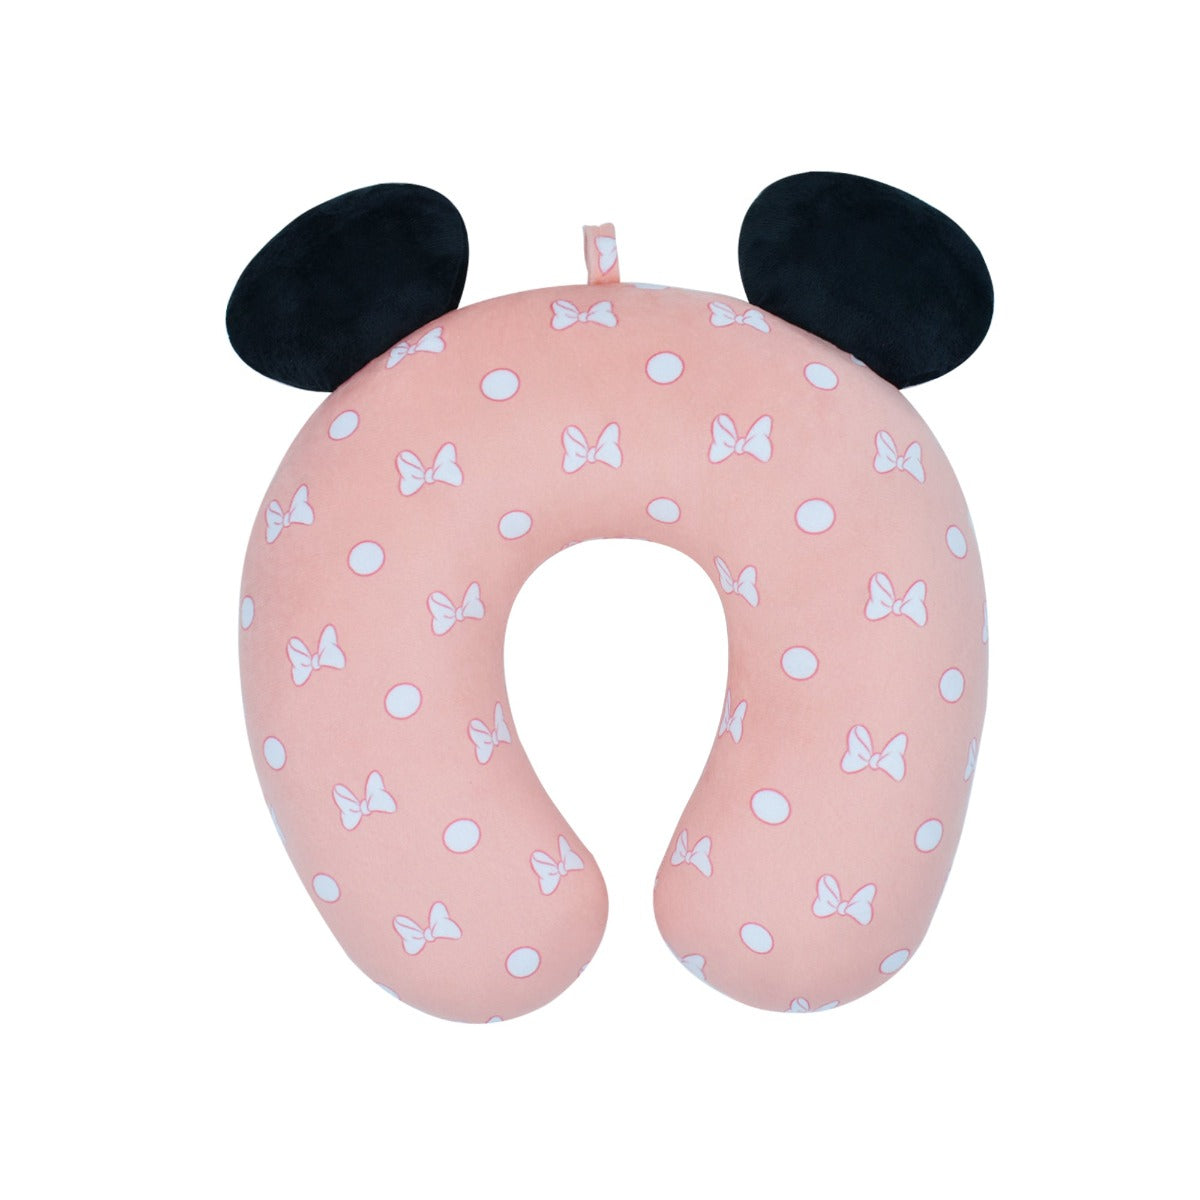 Disney Minnie Mouse Bow With Polka Dots Travel Neck Pillow